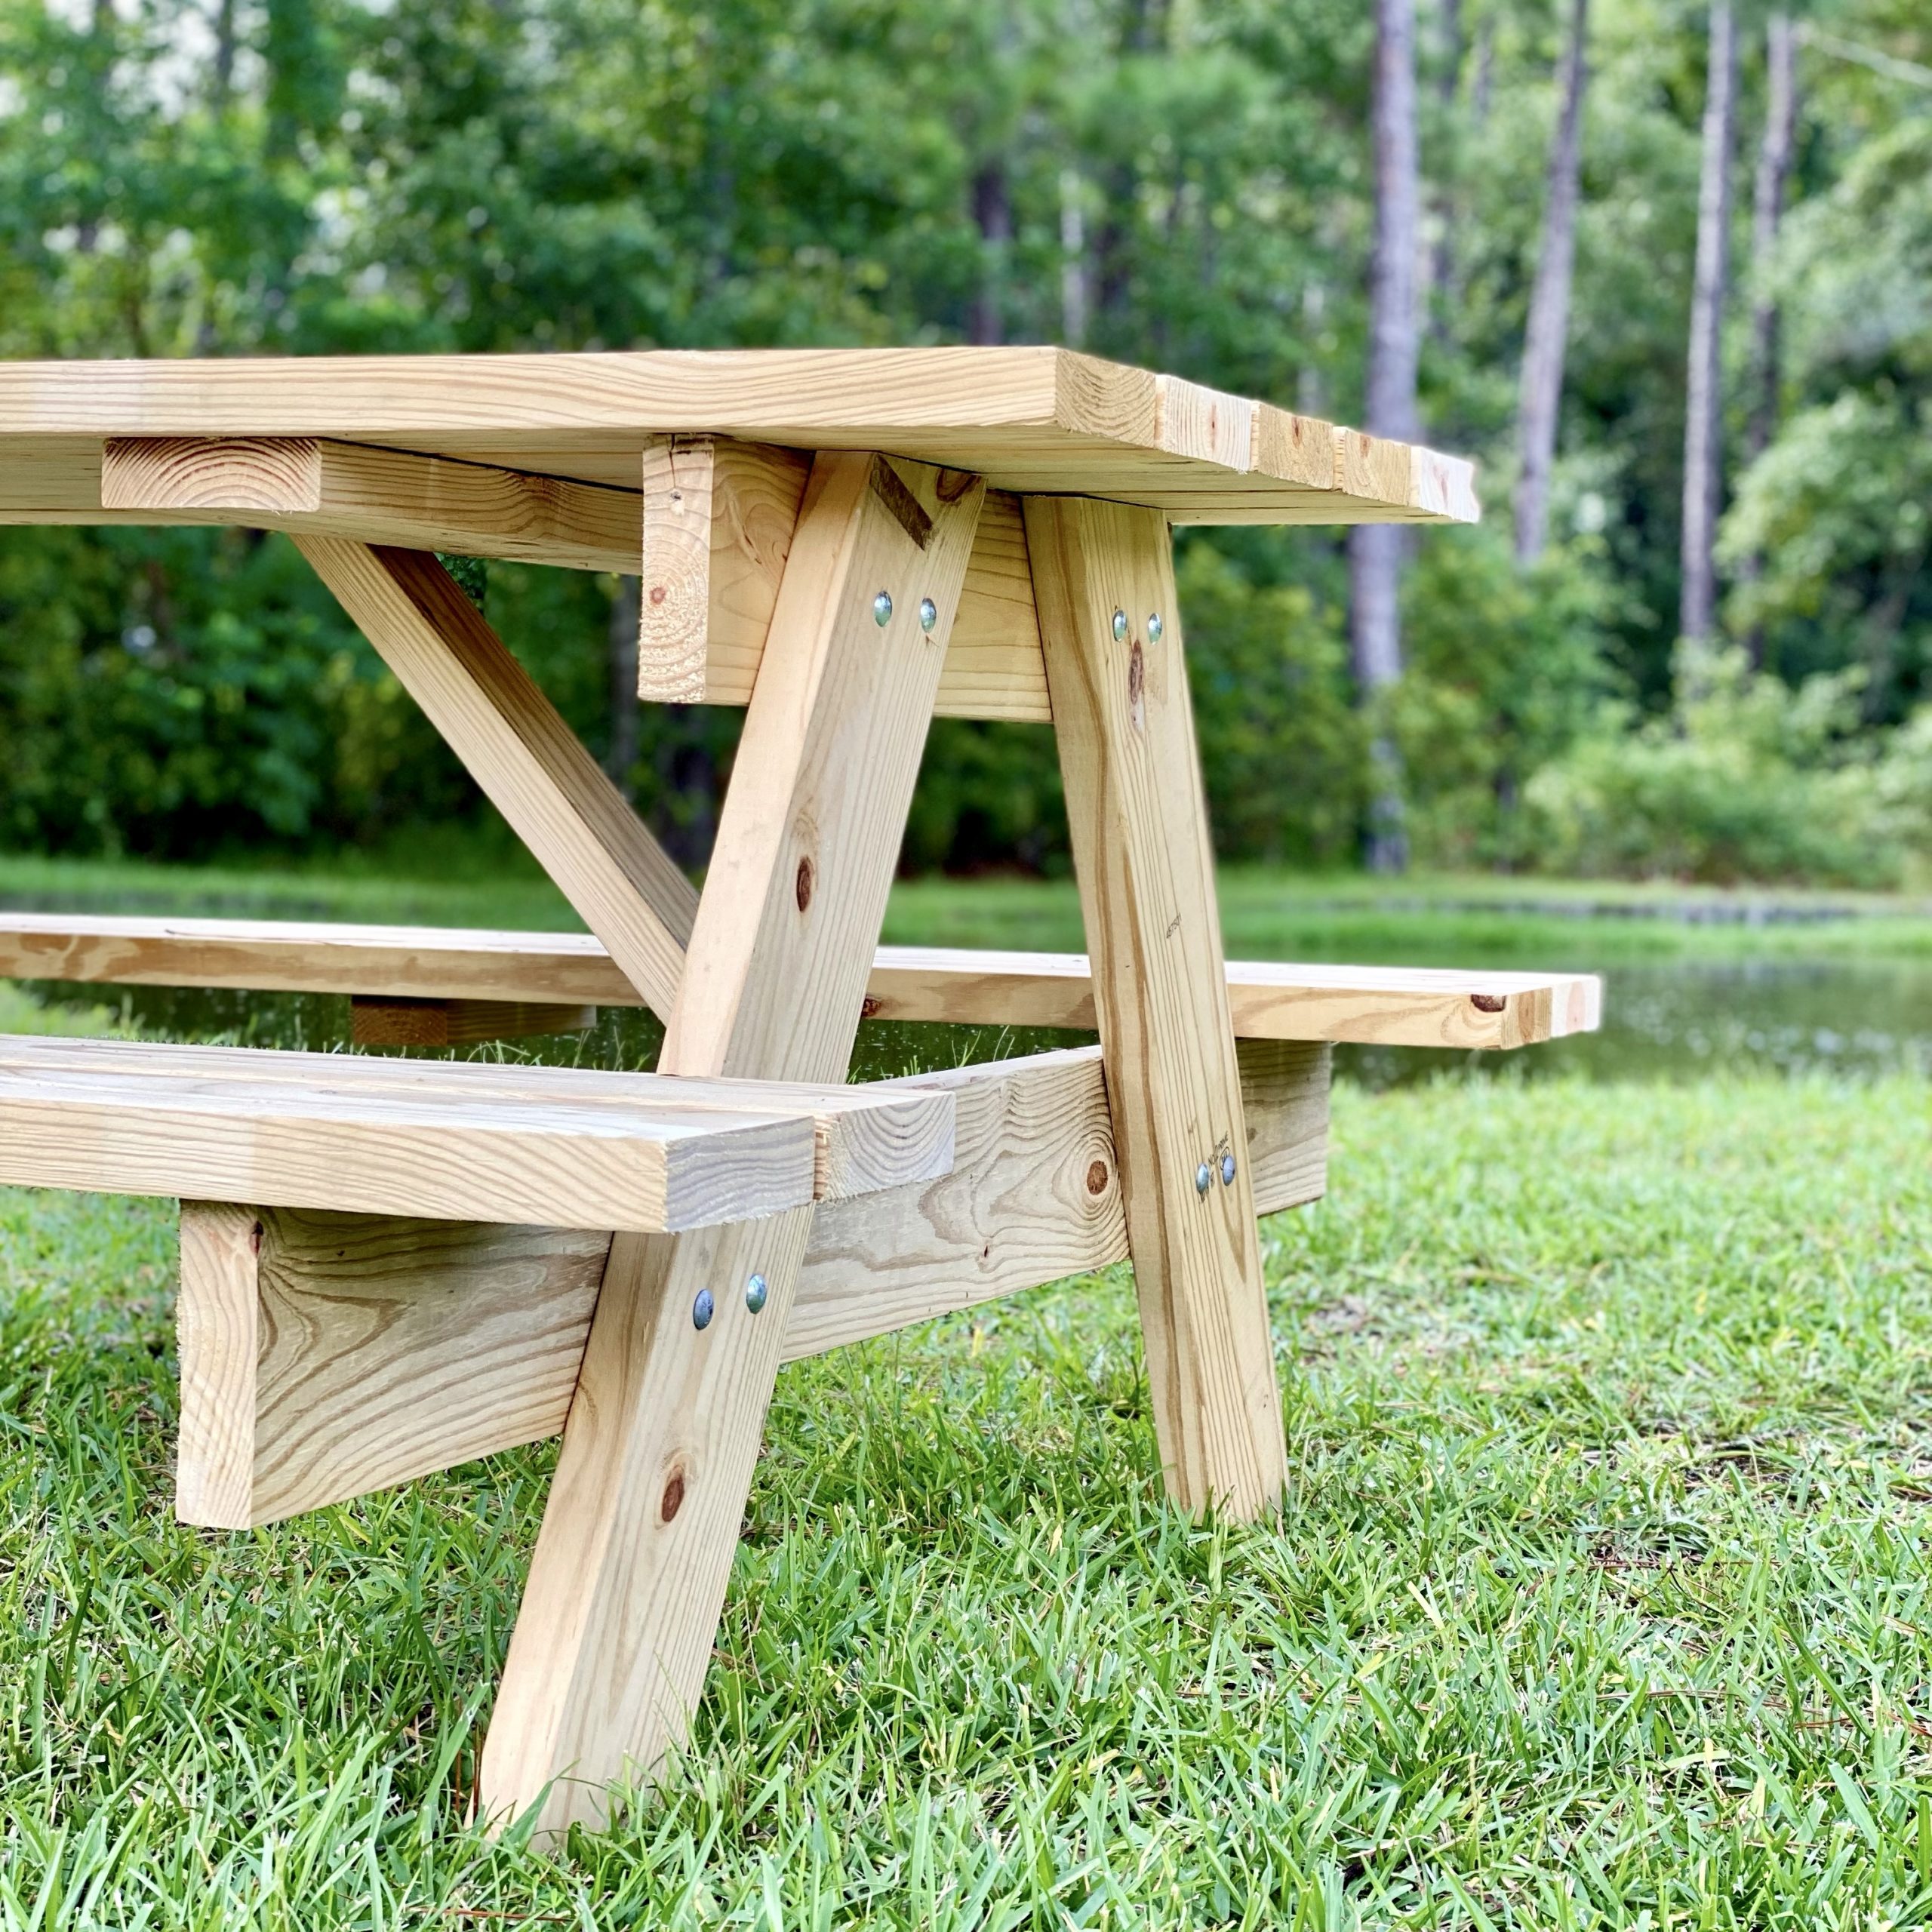 Side view of the DIY picnic table.